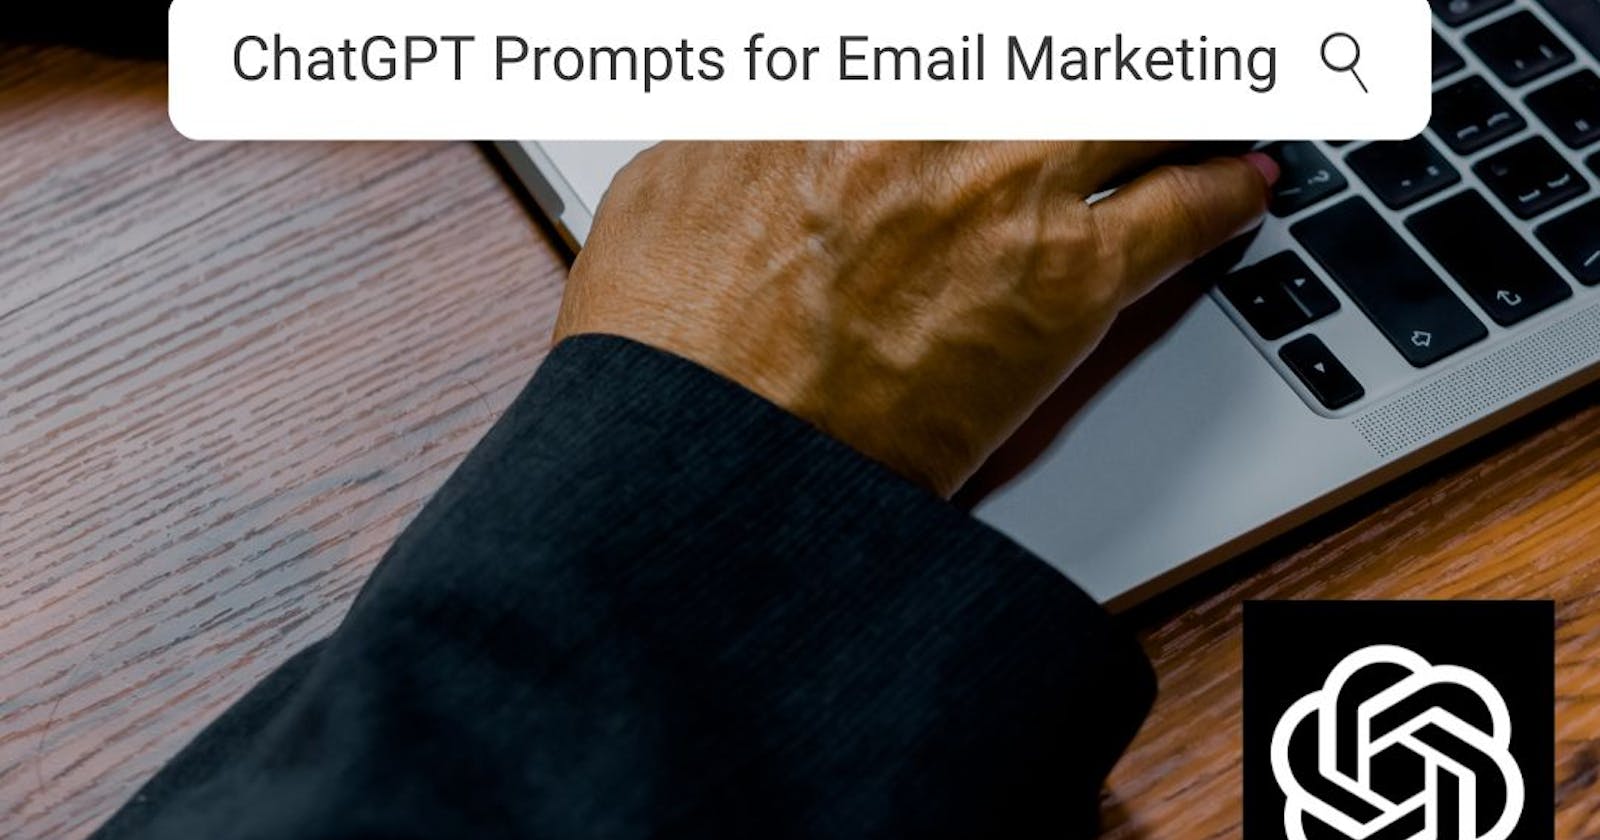 ChatGPT Prompts for Email Marketing